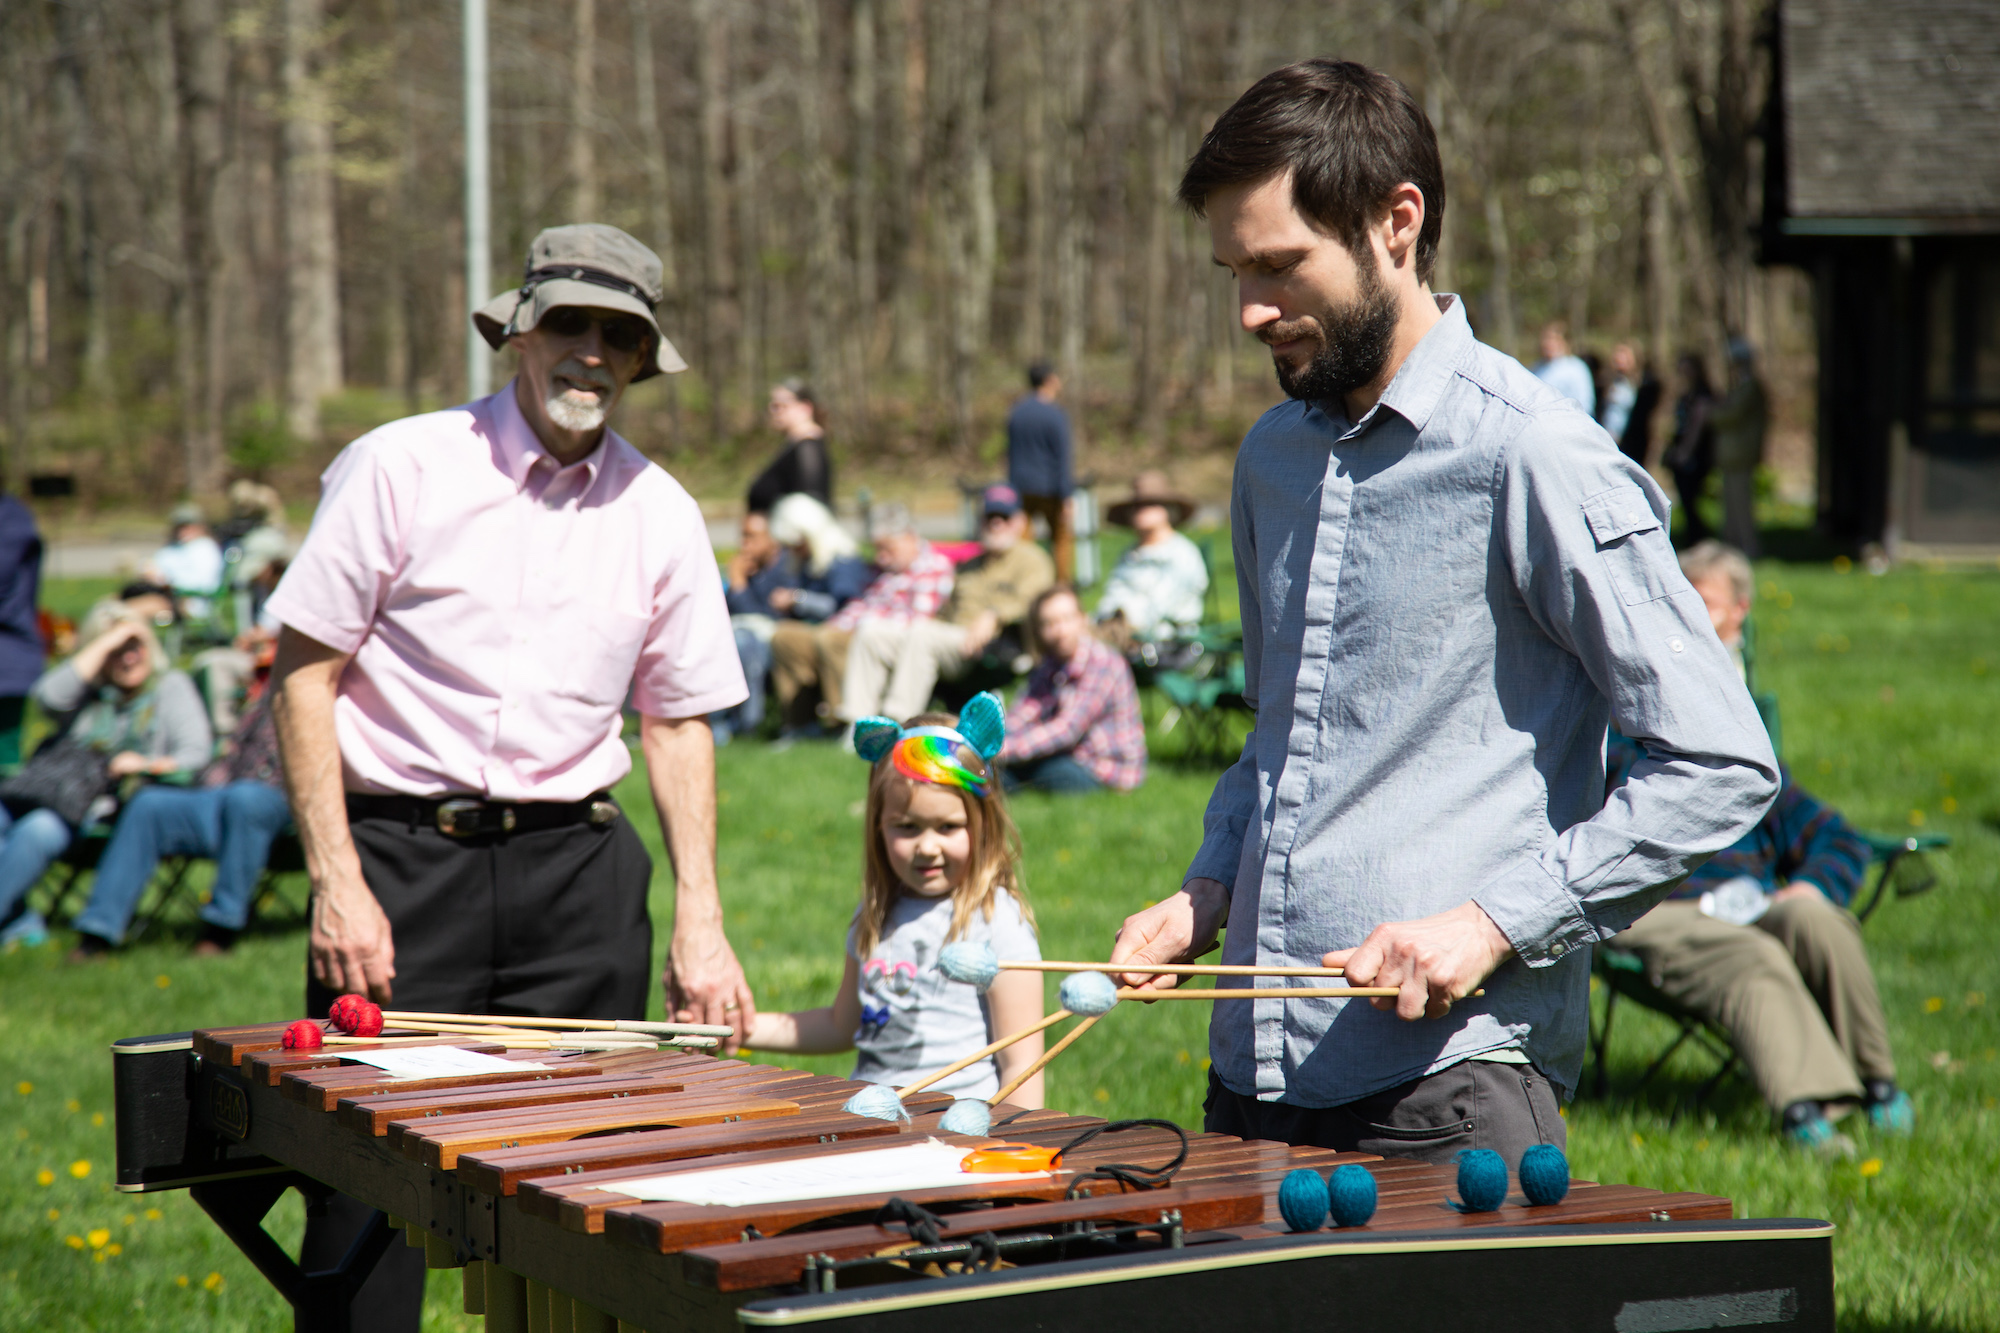 Man plays the xylophone while an older man and a child look on